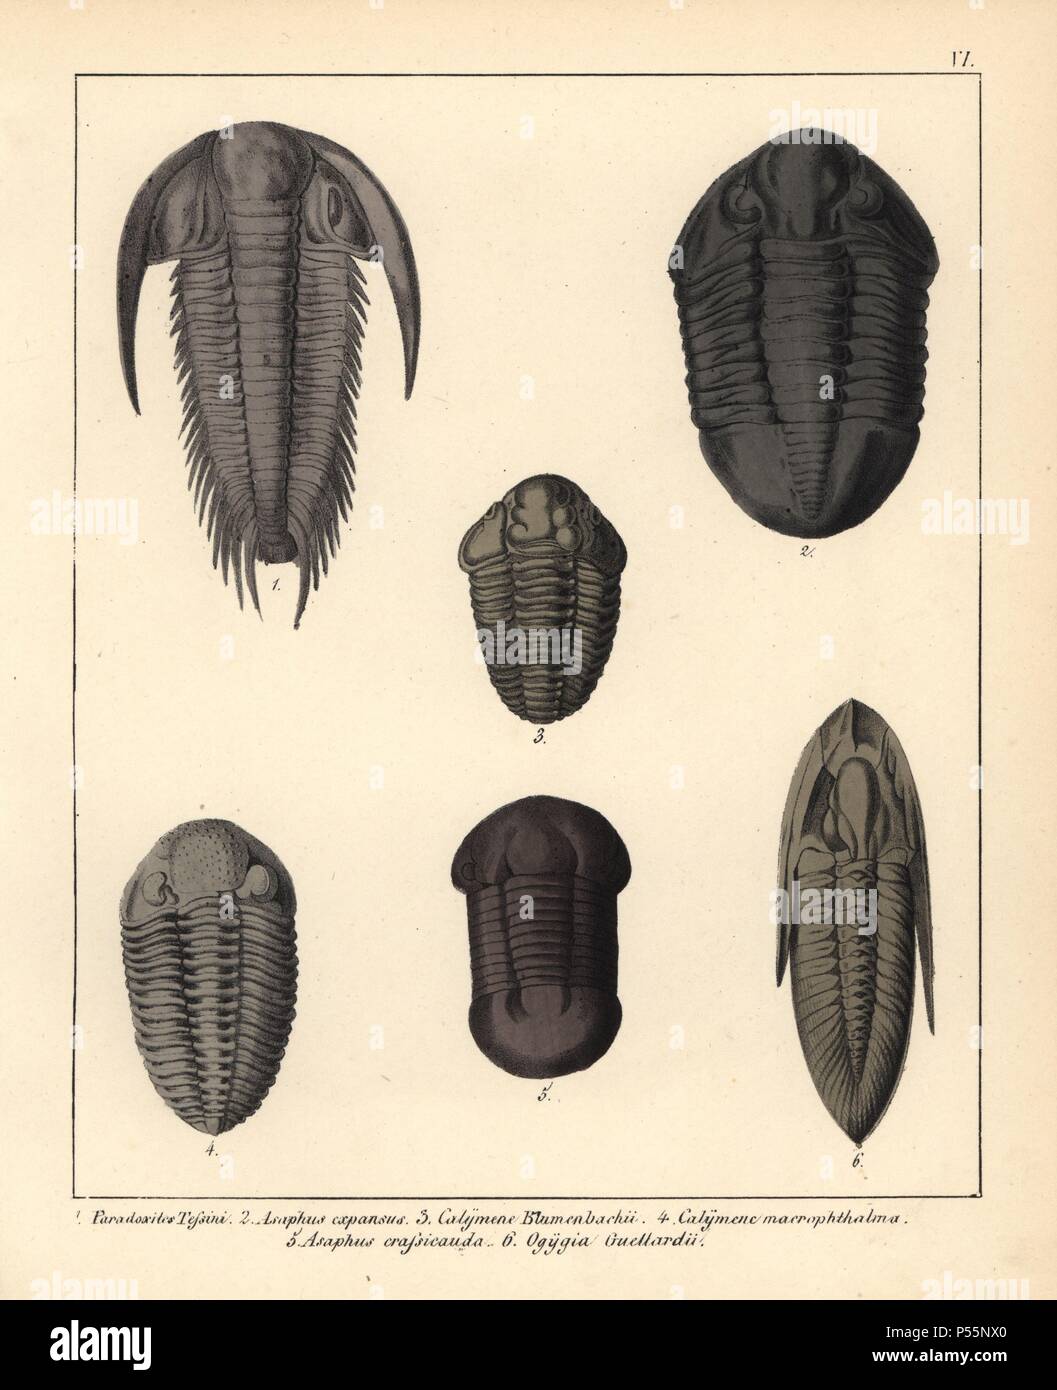 Fossils of extinct trilobites: Paradoxites tessini, Asaphus expansus, Calymene Blumenbachii, Calymene macrophthalma, Asaphus crassicauda, Ogygia guellardii. Handcoloured lithograph by an unknown artist from Dr. F.A. Schmidt's 'Petrefactenbuch,' published in Stuttgart, Germany, 1855 by Verlag von Krais & Hoffmann. Dr. Schmidt's 'Book of Petrification' introduced fossils and palaeontology to both the specialist and general reader. Stock Photo